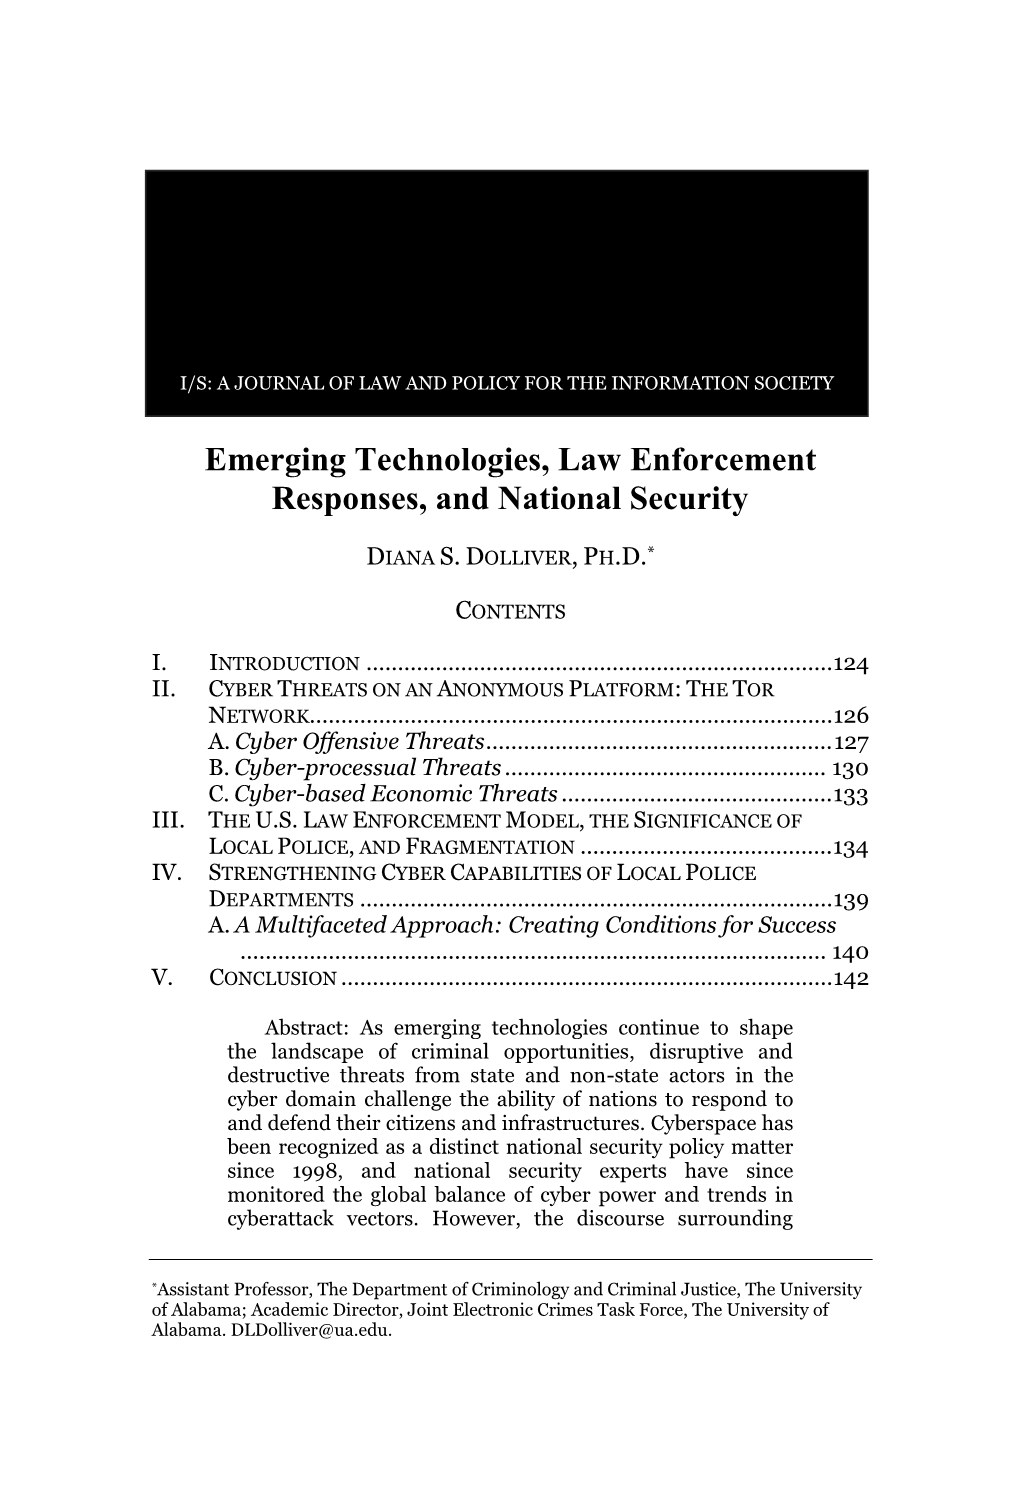 Emerging Technologies, Law Enforcement Responses, and National Security